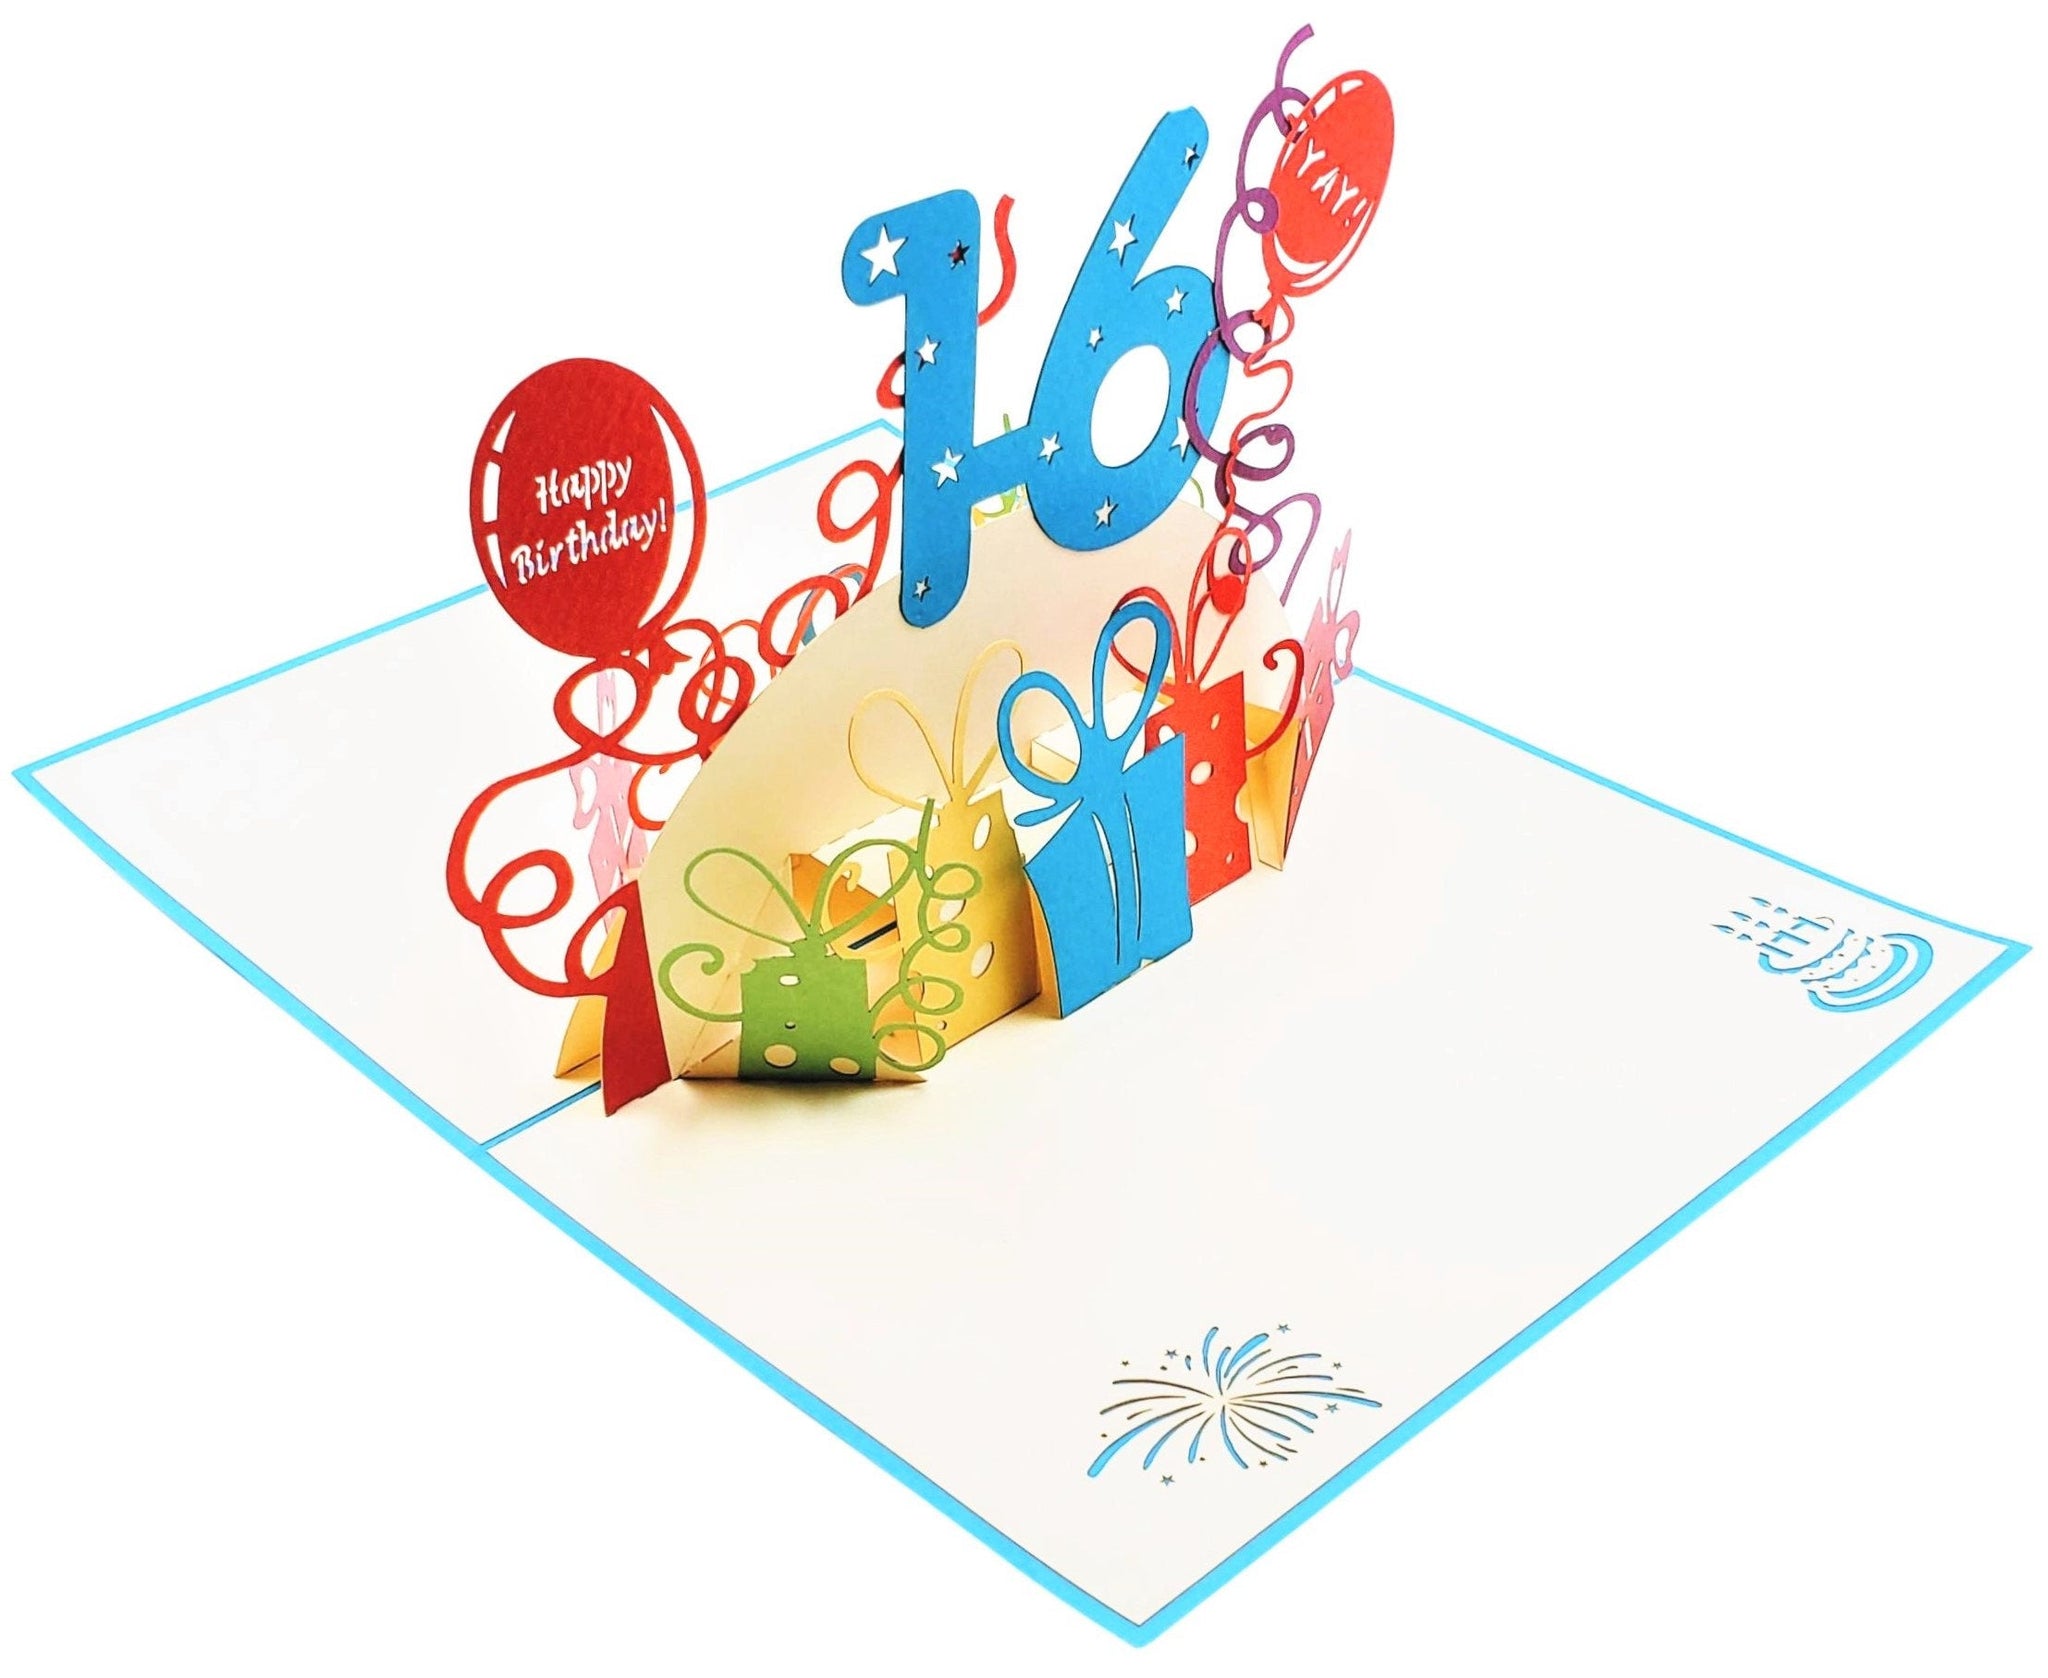 Happy 16th Birthday with Presents 3D Pop Up Greeting Card | iGifts And ...